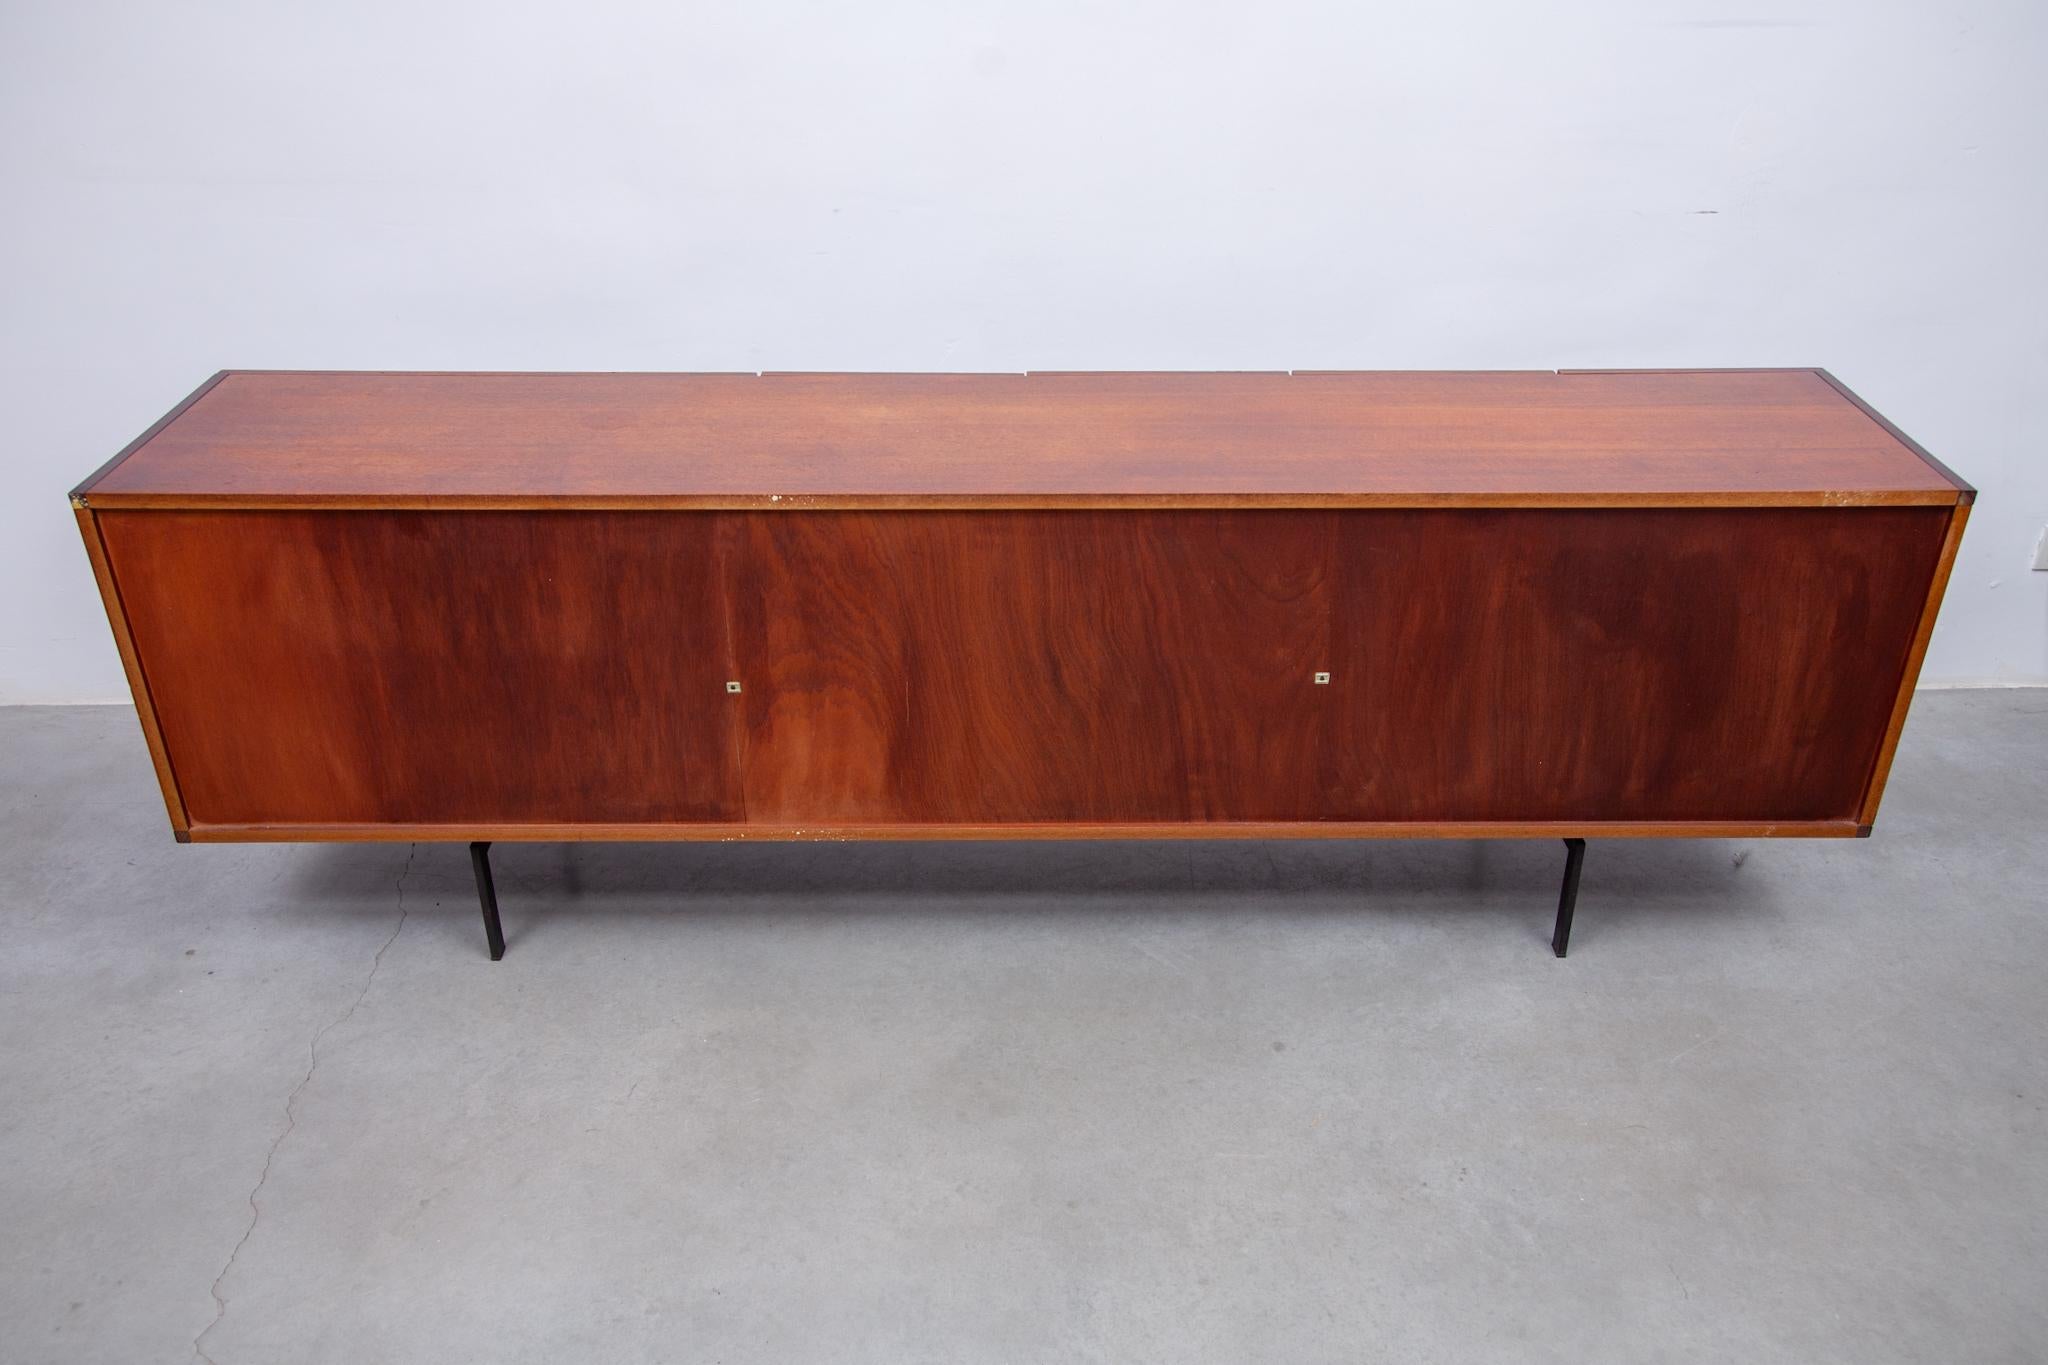 Japanese Serie DU03  Sideboard by Cees Braakman for Pastoe 1958, Dutch design For Sale 10